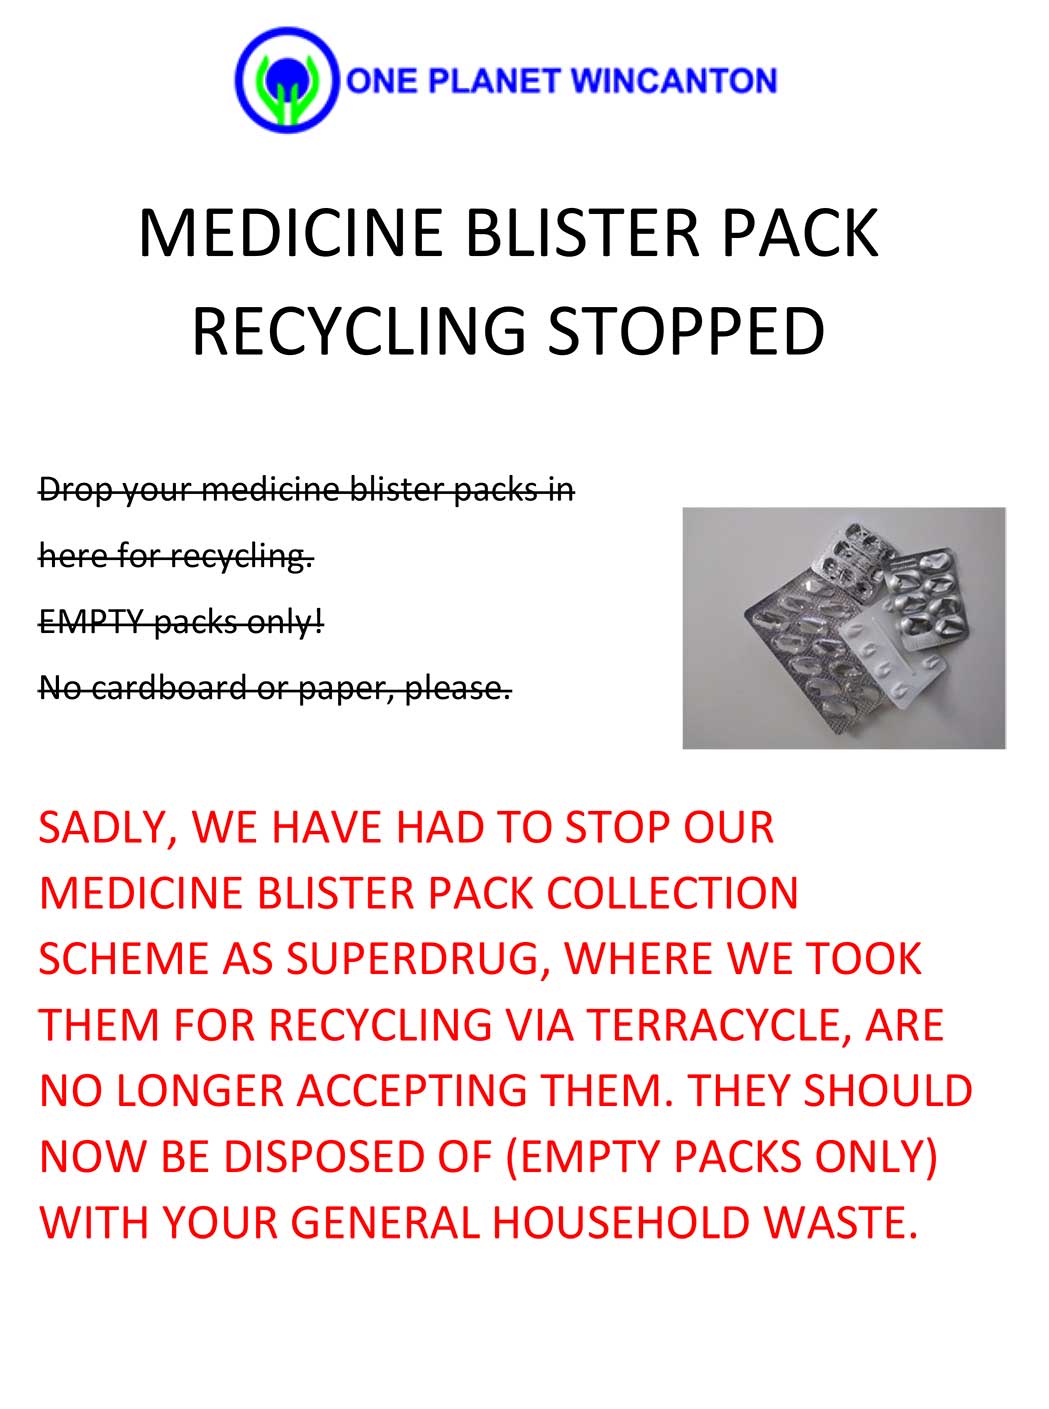 no more blister pack recycling in Wincanton